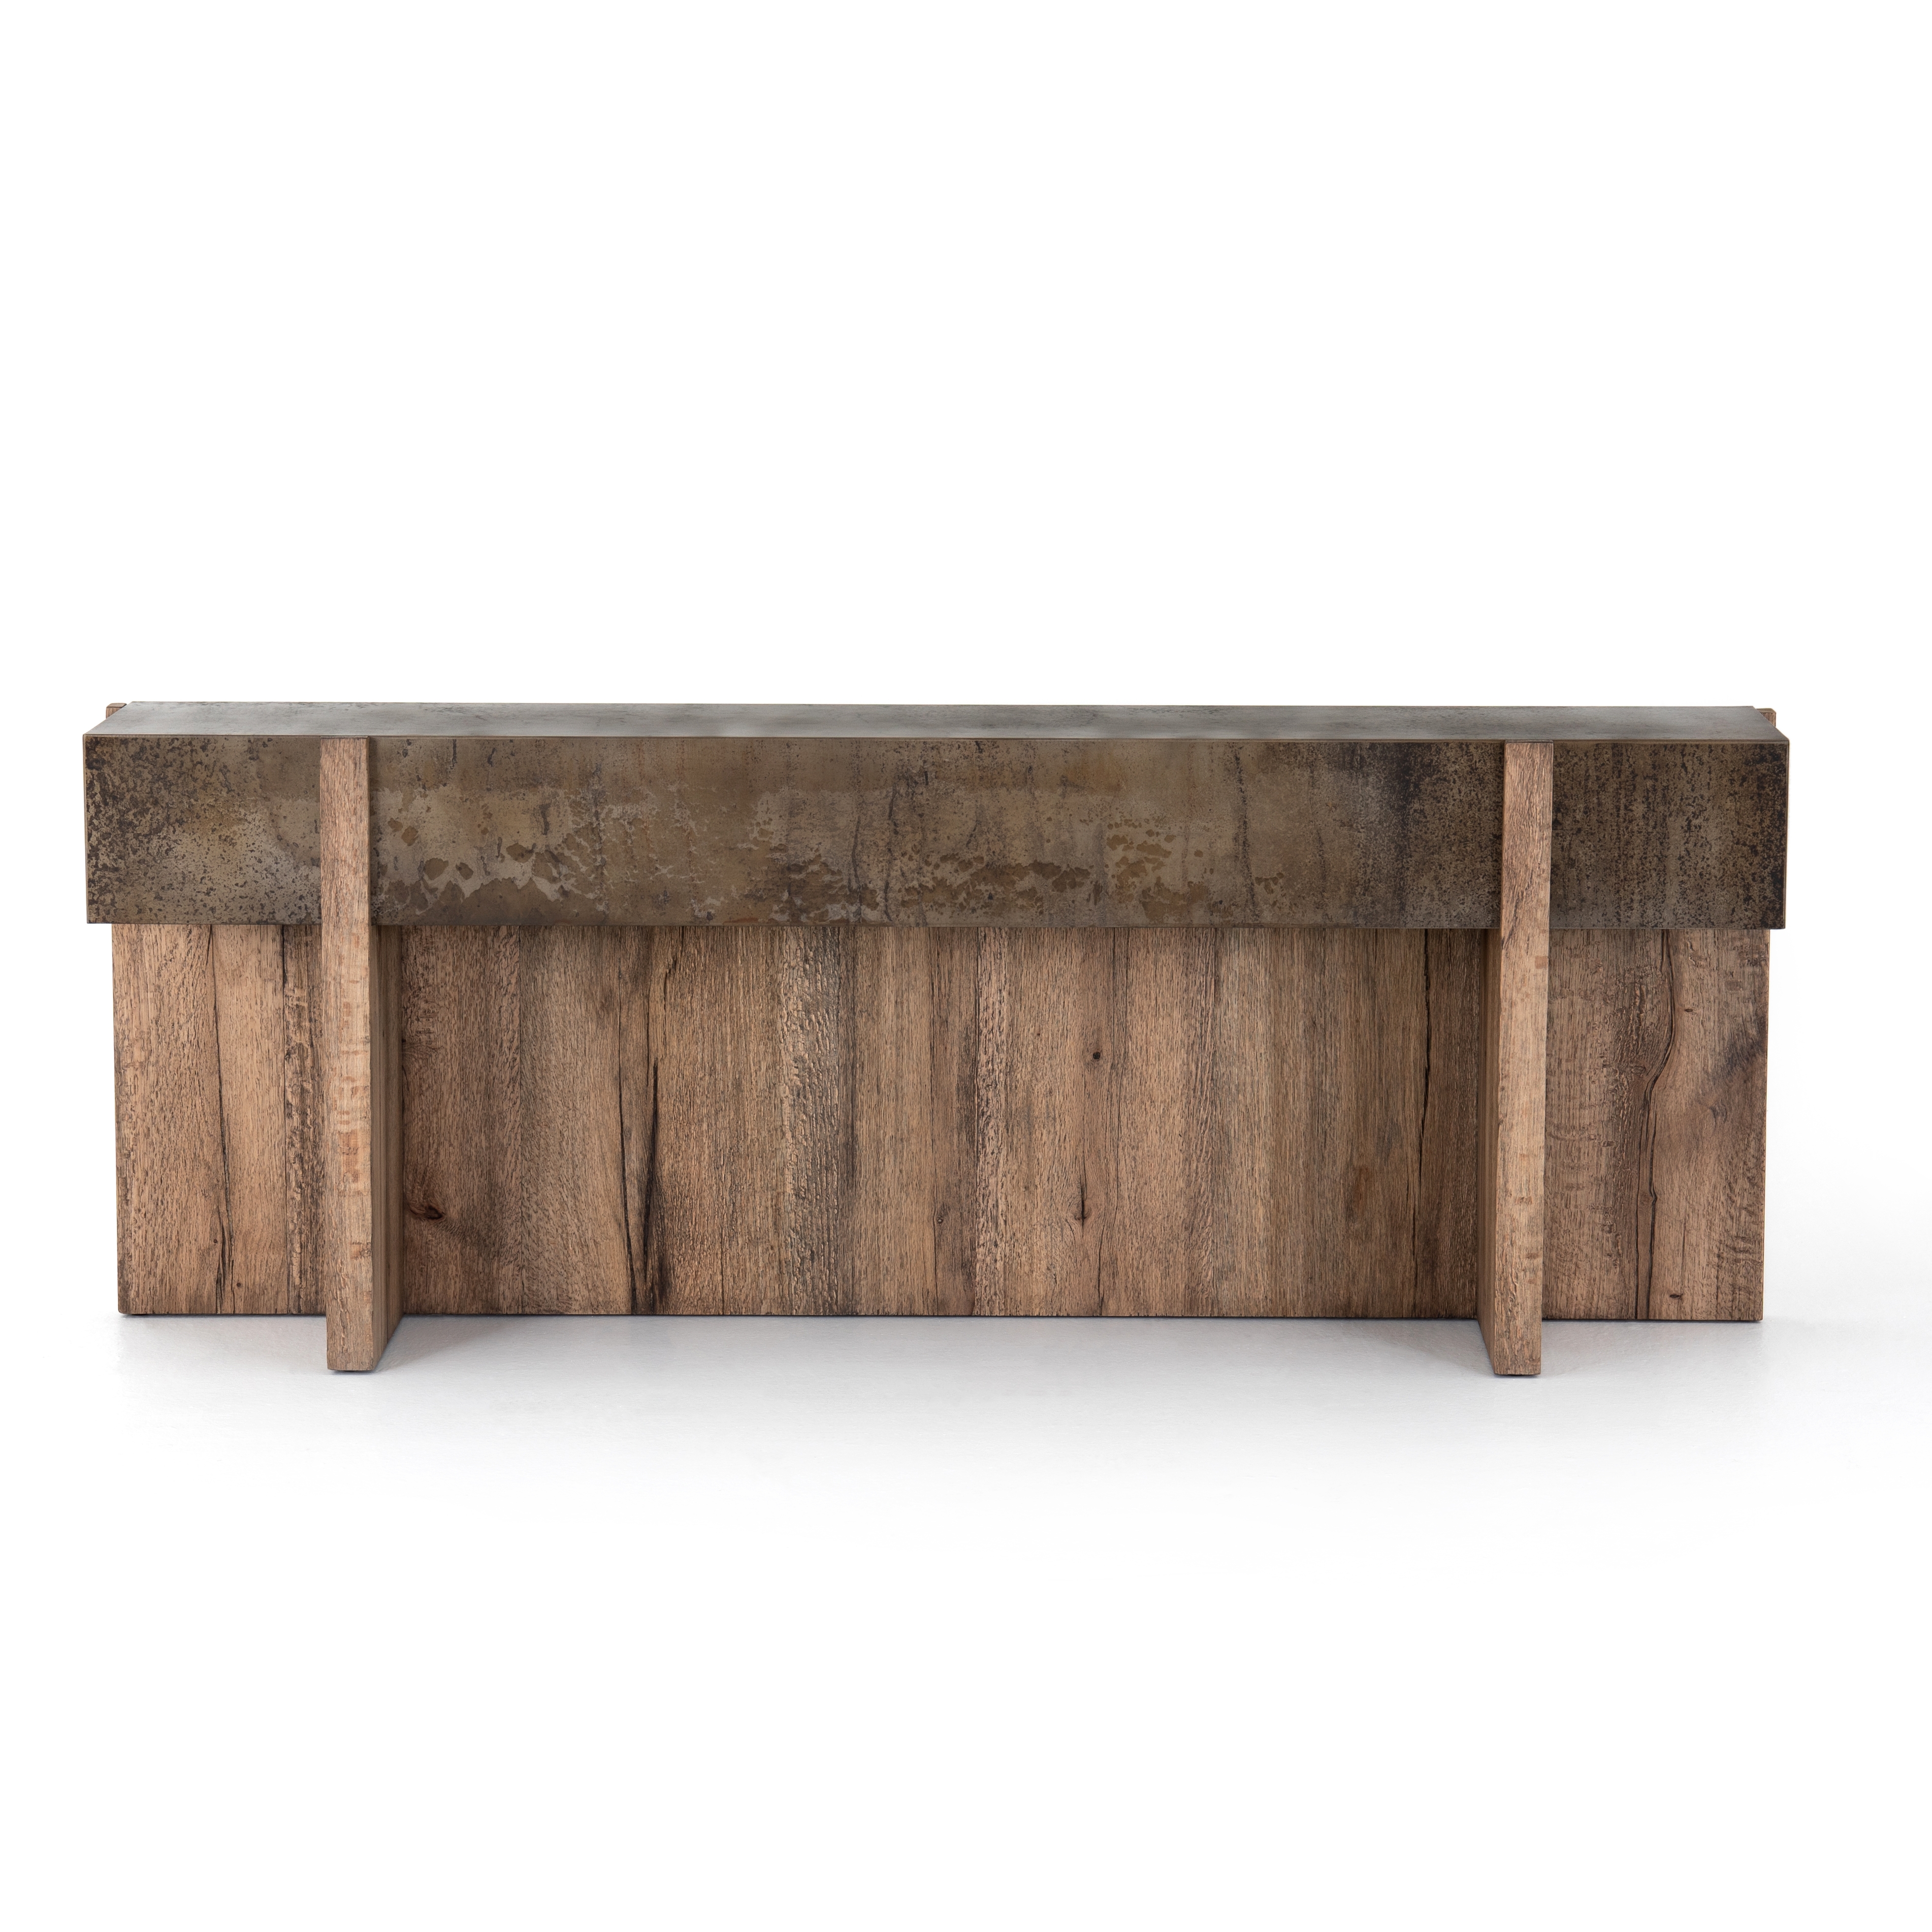 Bingham Console Table-Distressed Iron - Image 4